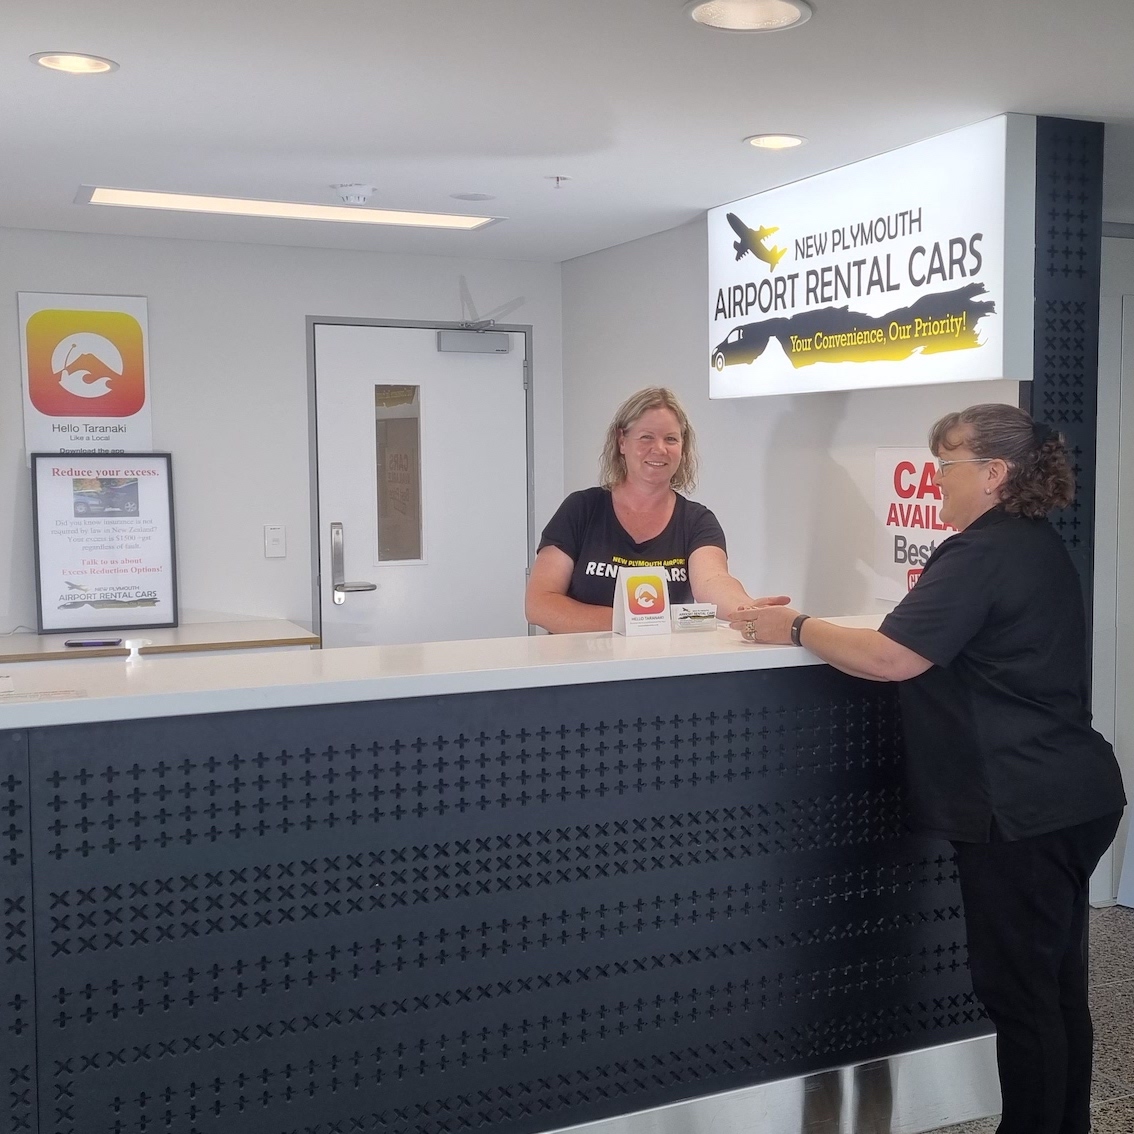 You'll find New Plymouth Airport Rental Cars inside the airport terminal at New Plymouth